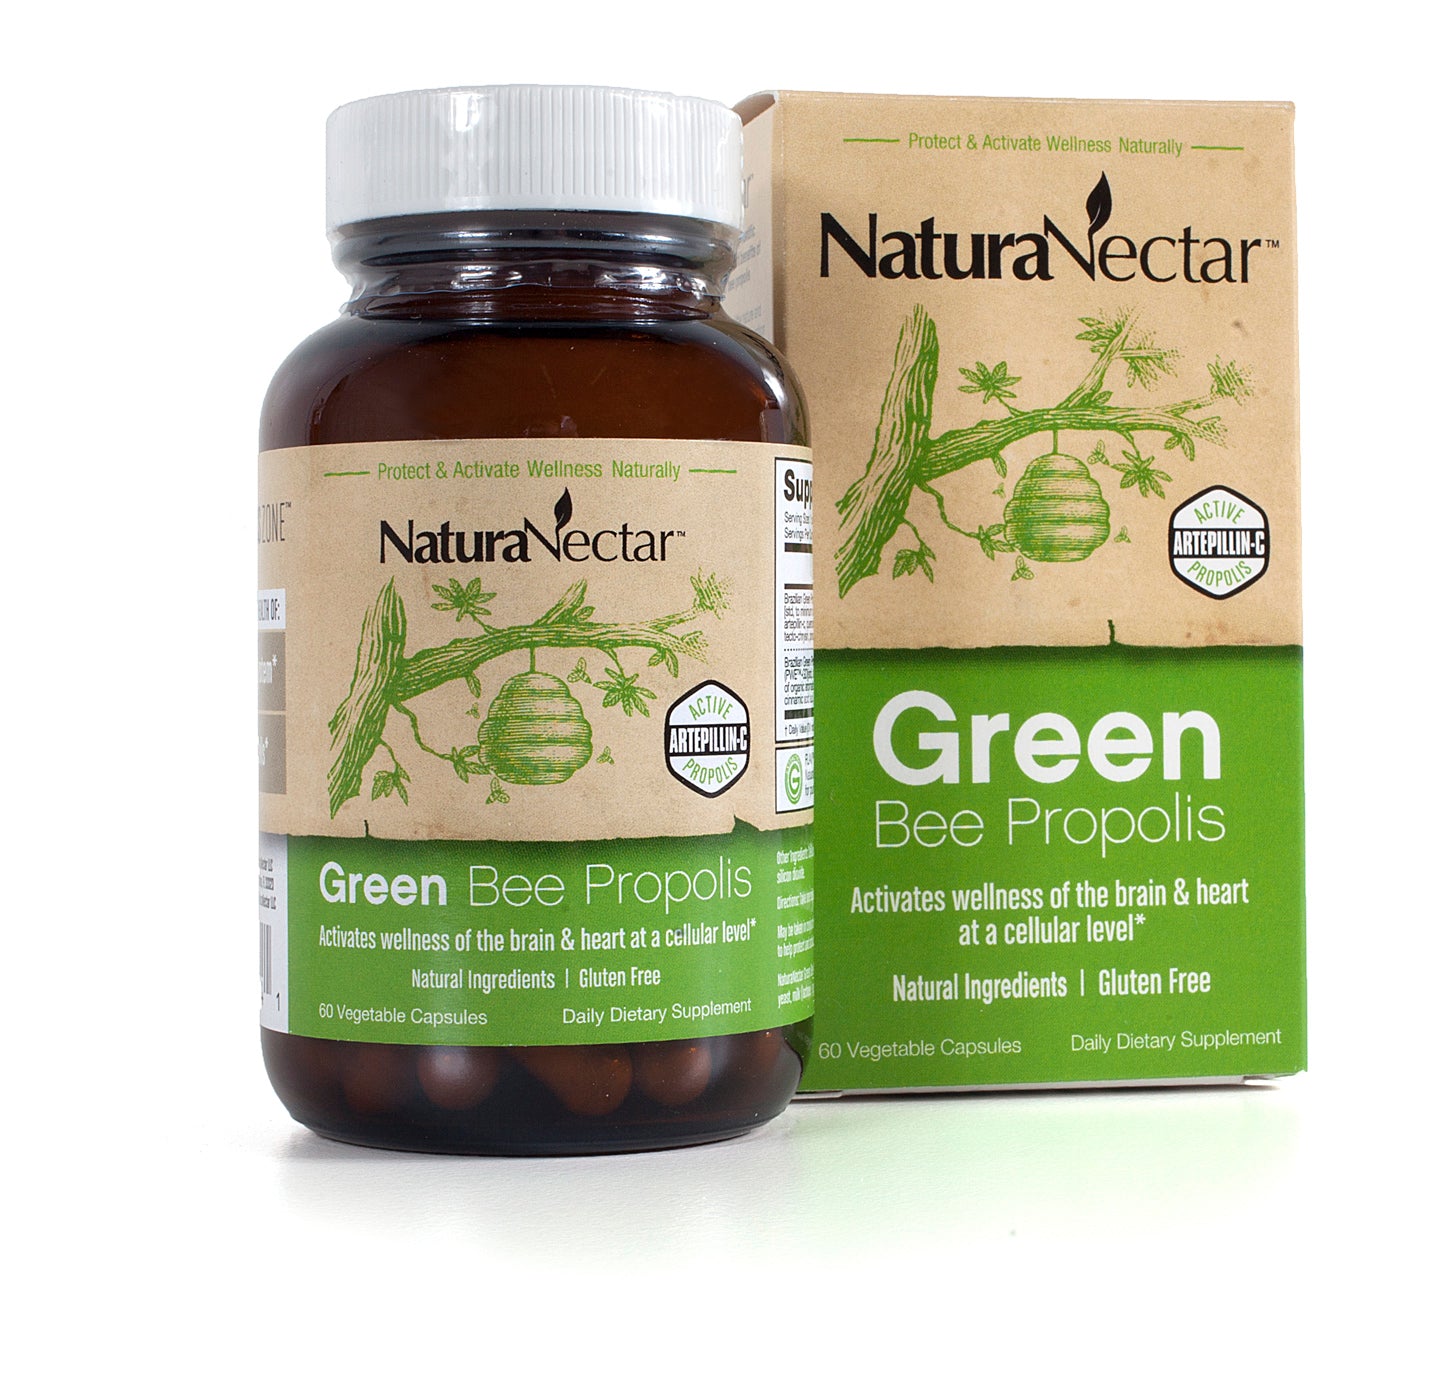 Green Bee Propolis - Nootropic product supports wellness of your brain* & immune system health* through exclusive polyphenols like Artepillin-C